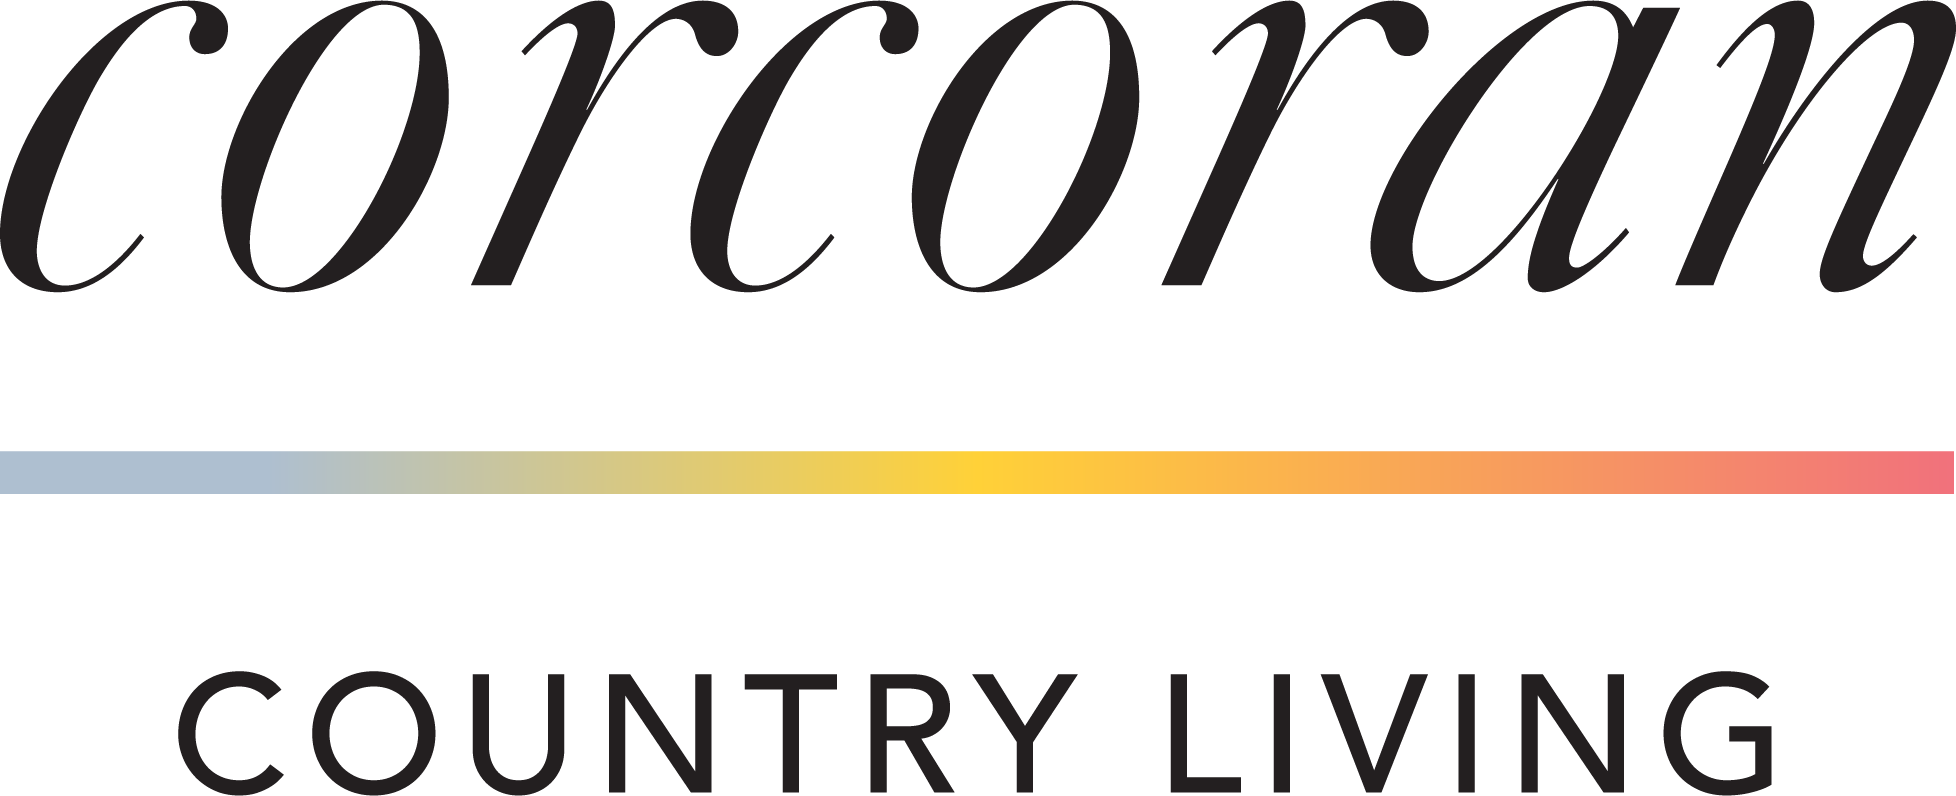 Corcoran Country Living logo